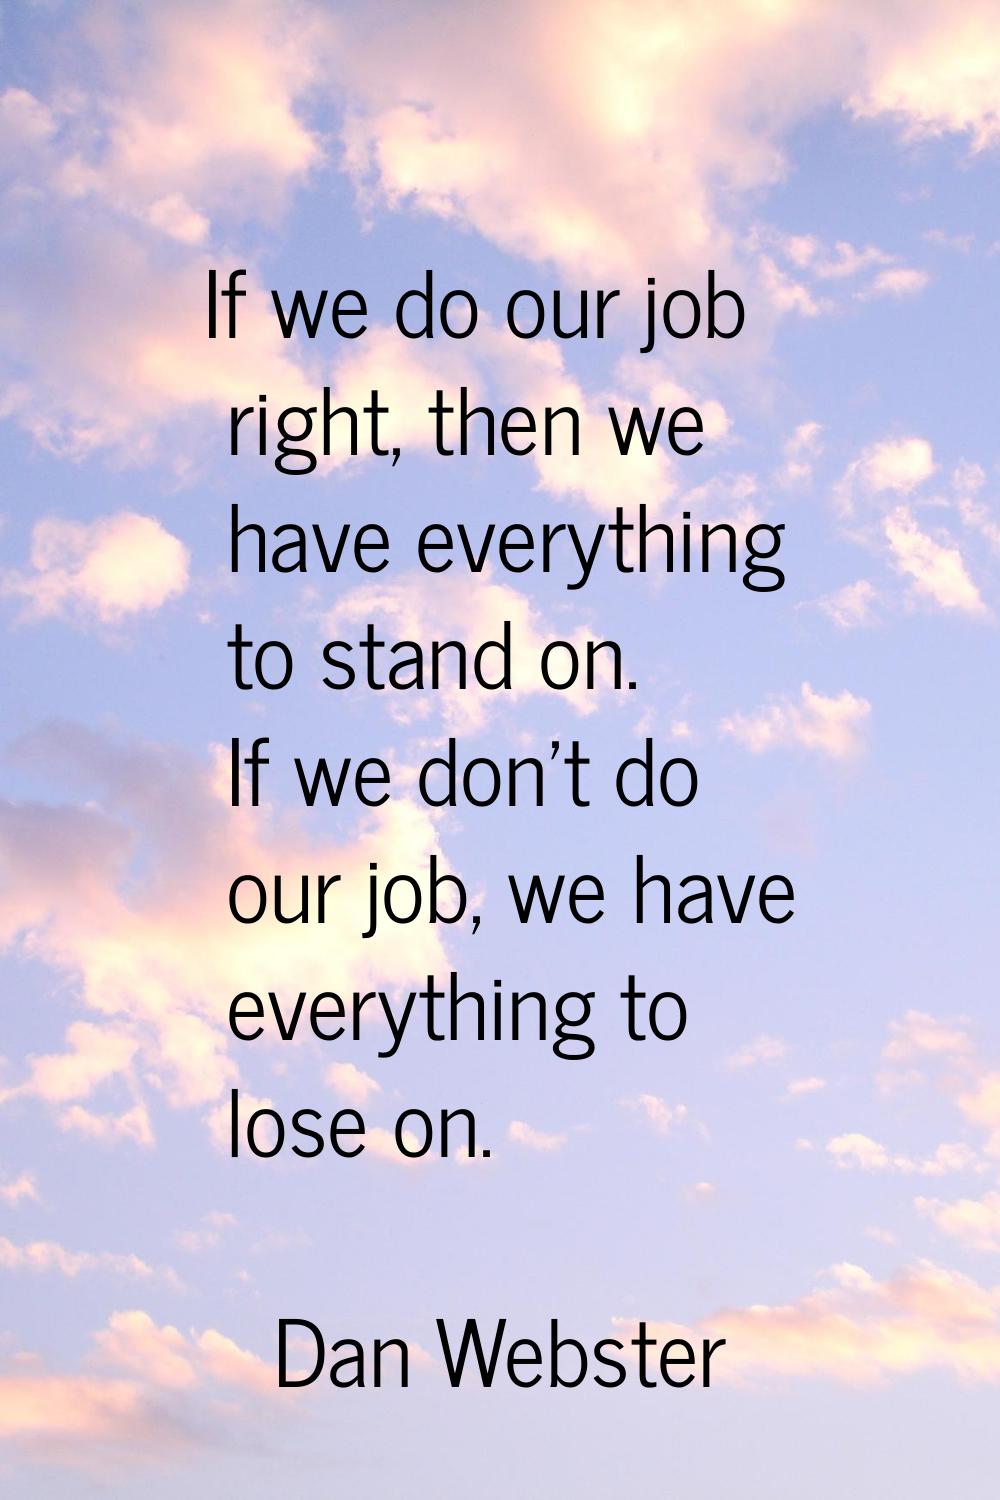 If we do our job right, then we have everything to stand on. If we don't do our job, we have everyt